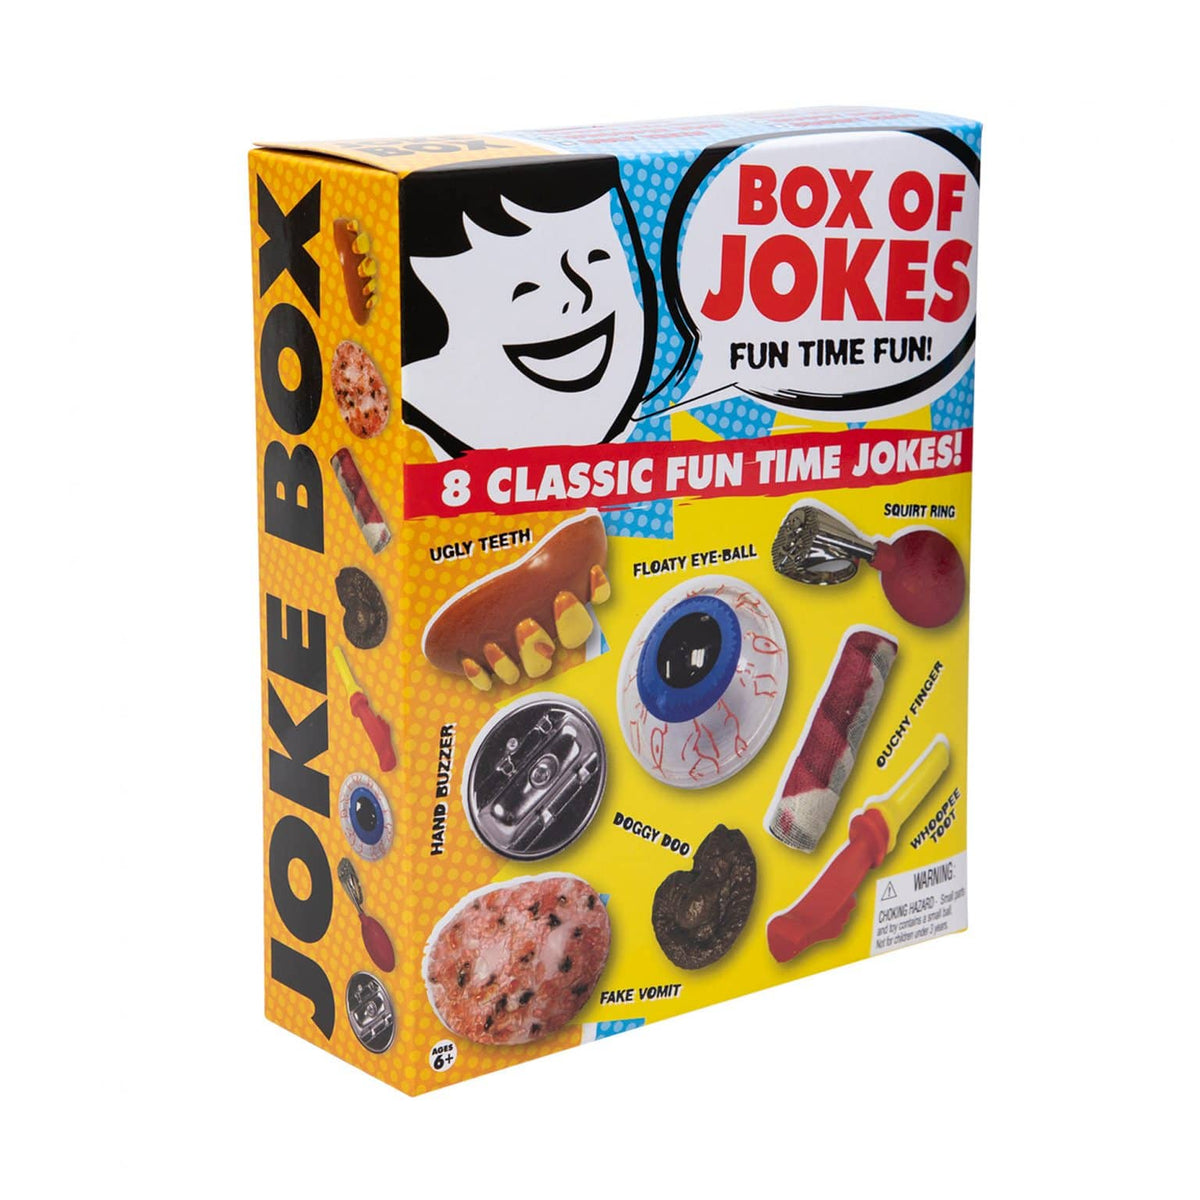 Front view of Joke Box showing the contents including: ugly teeth, floaty eye-ball, squirt ring, hand buzzer, doggy doo ouchy finger, whoopee toot, and fake vomit.